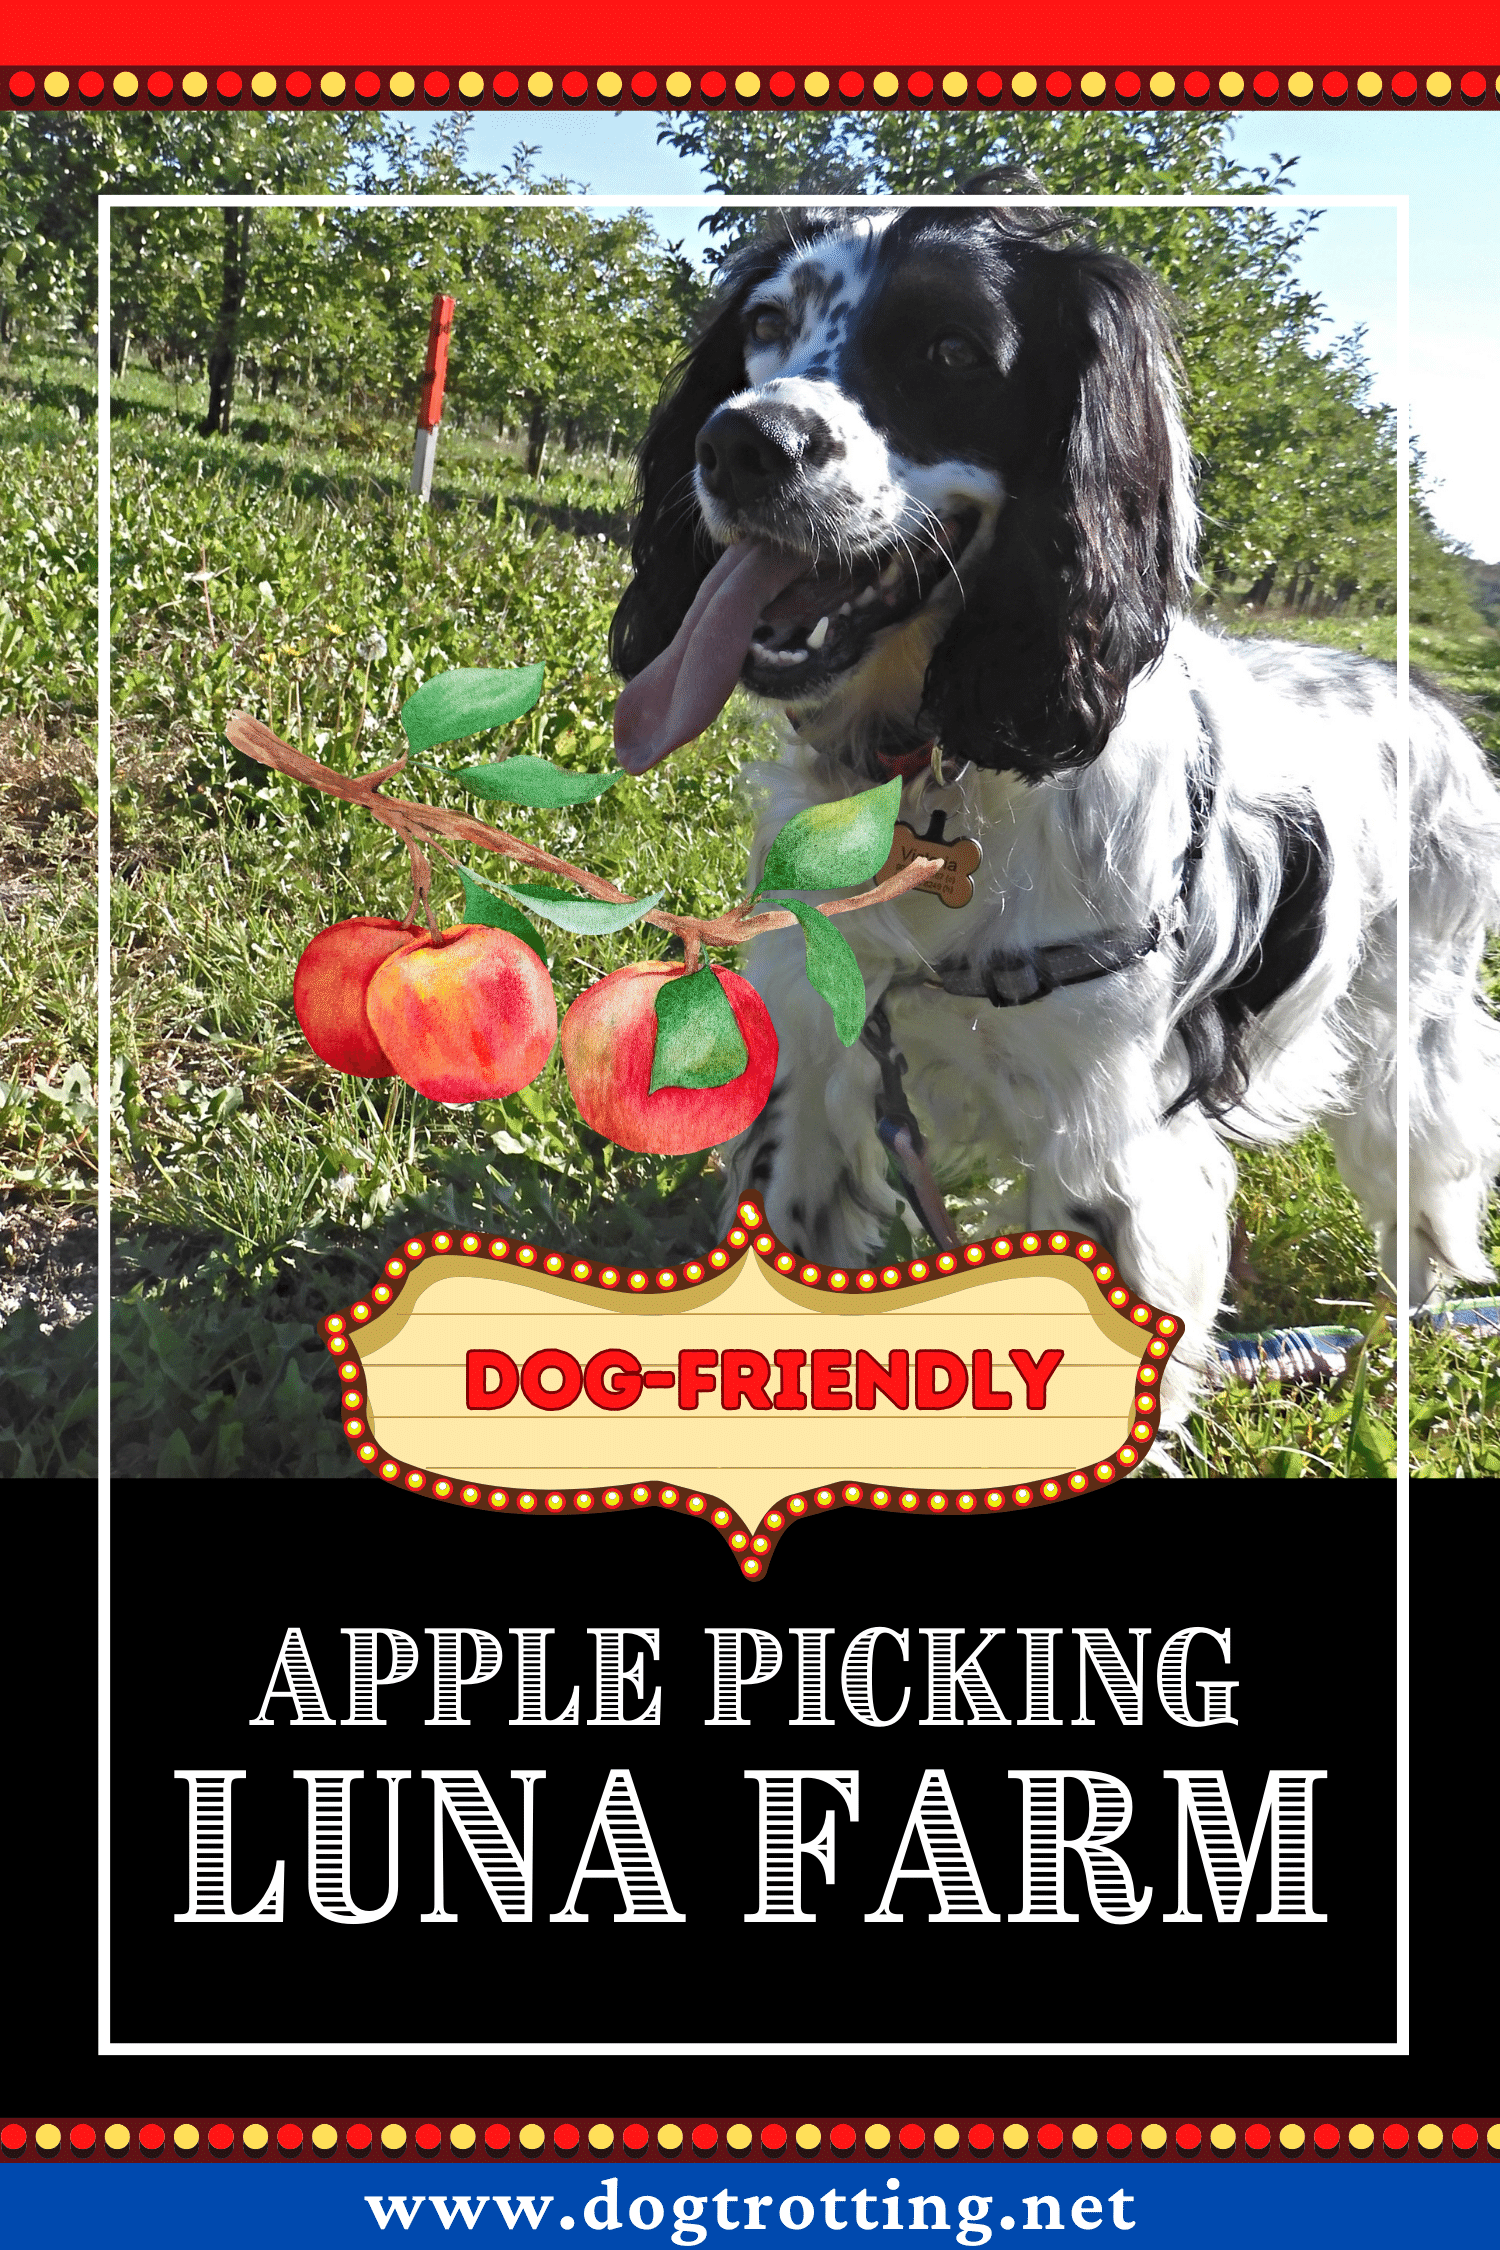 poster with black and white dog in apple field promoting dog friendly Luna Farms